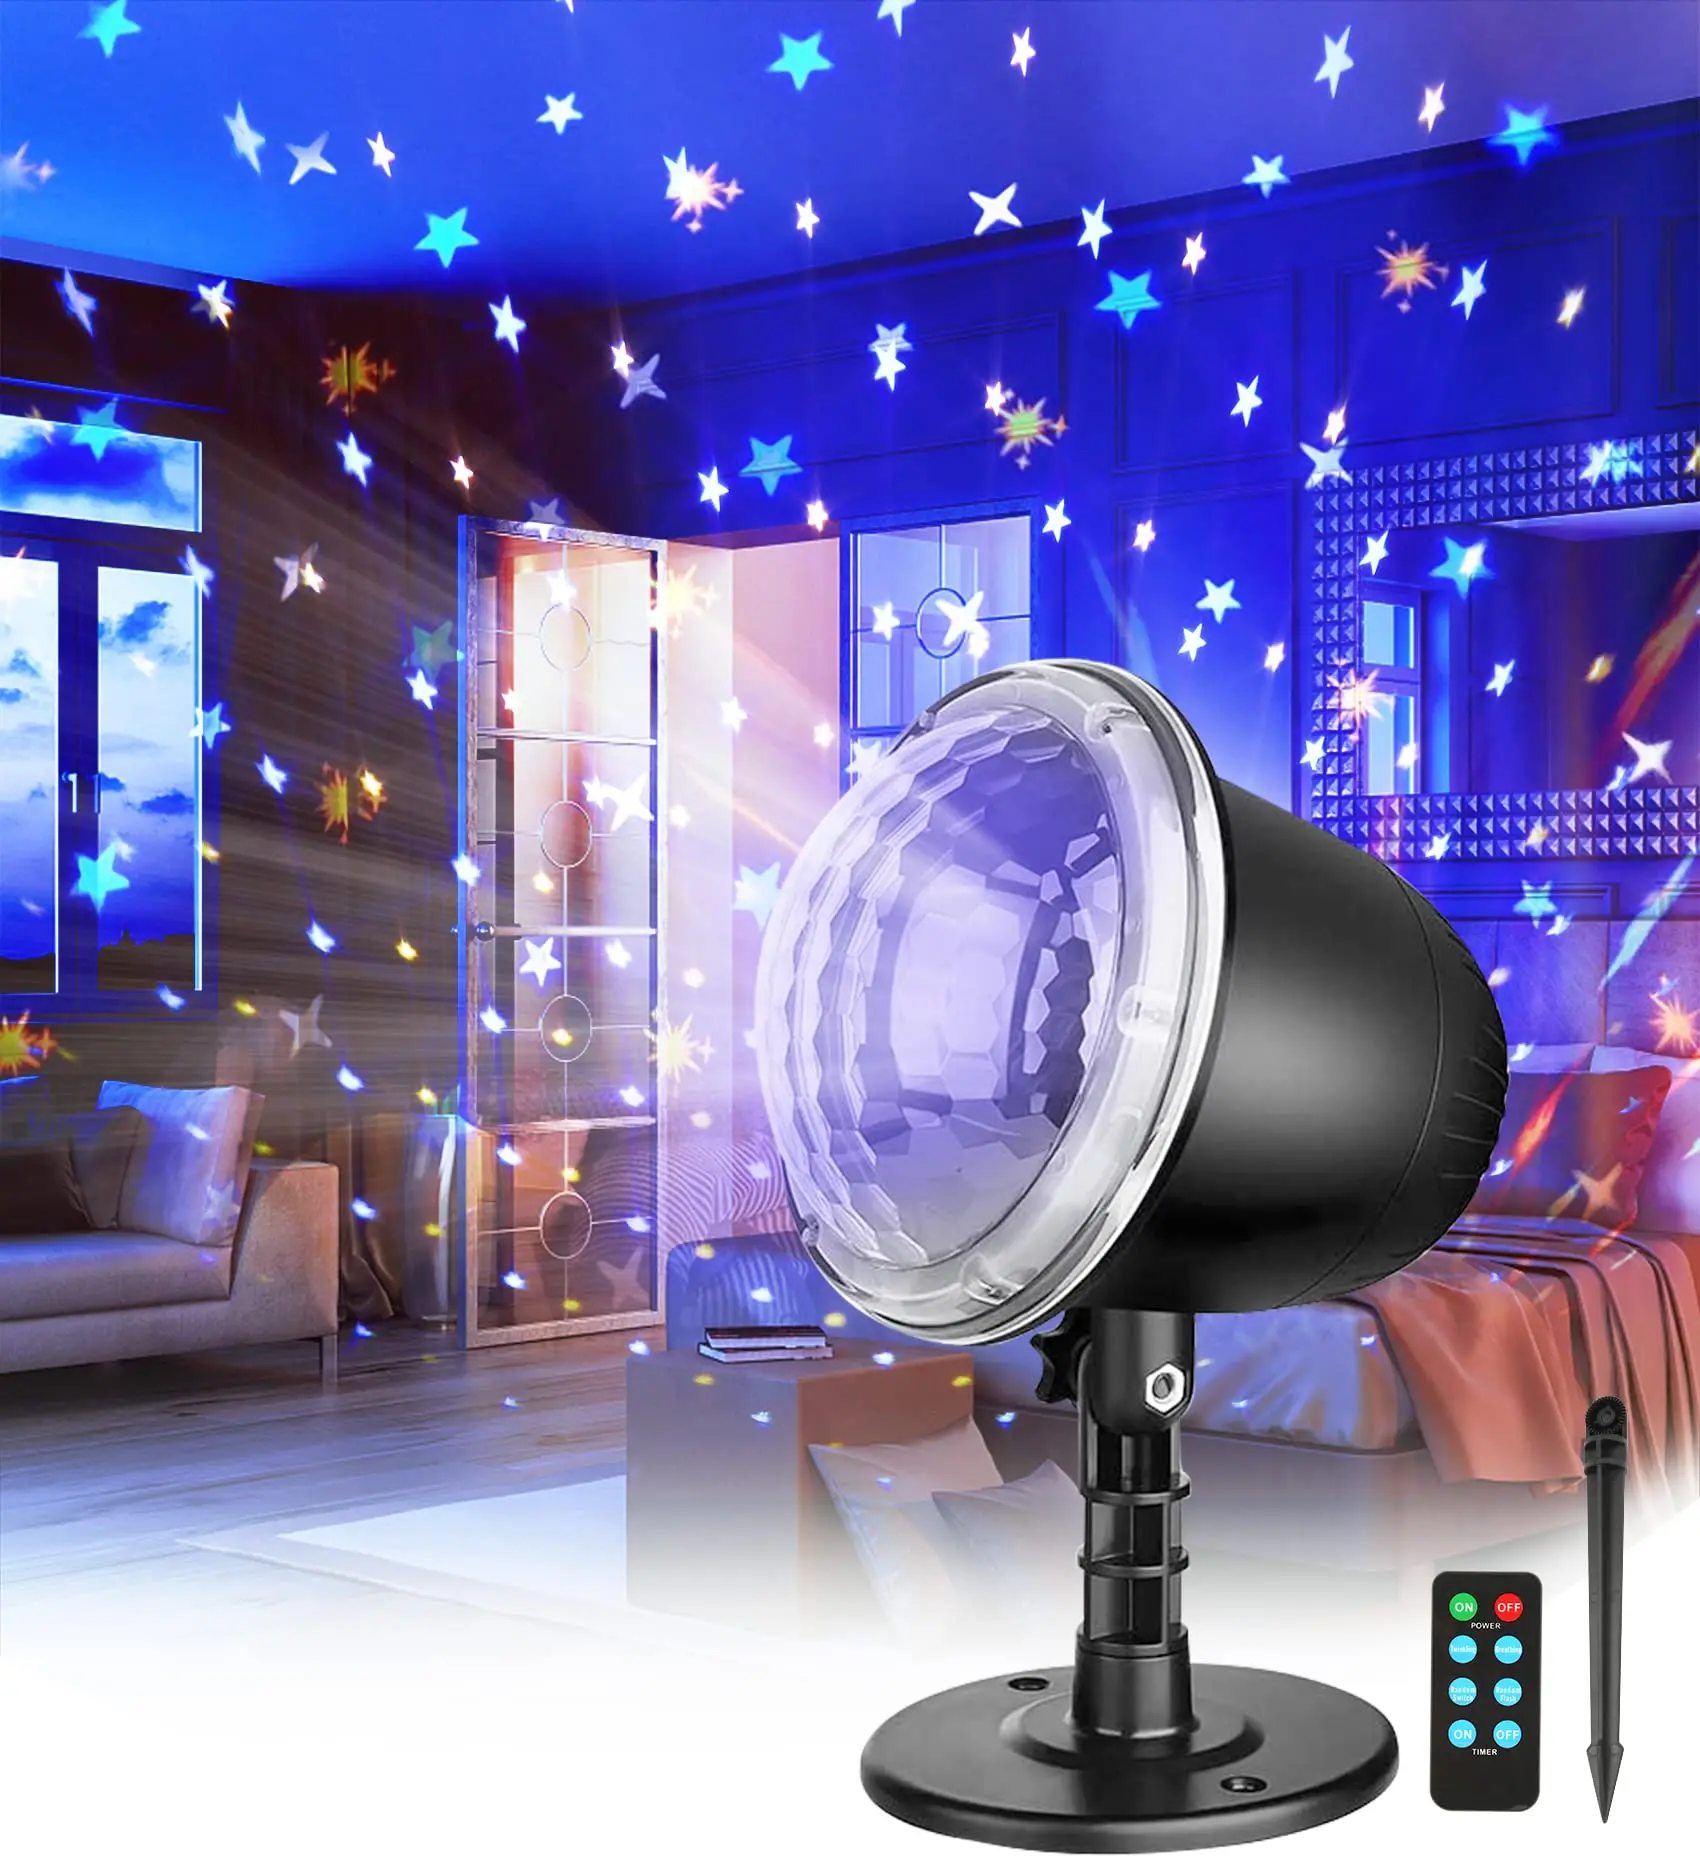 Star Projector Planetarium Projector Mini Projector Night Light Dropshipping 2022 Best-selling Products Outdoor Indoor Lighting